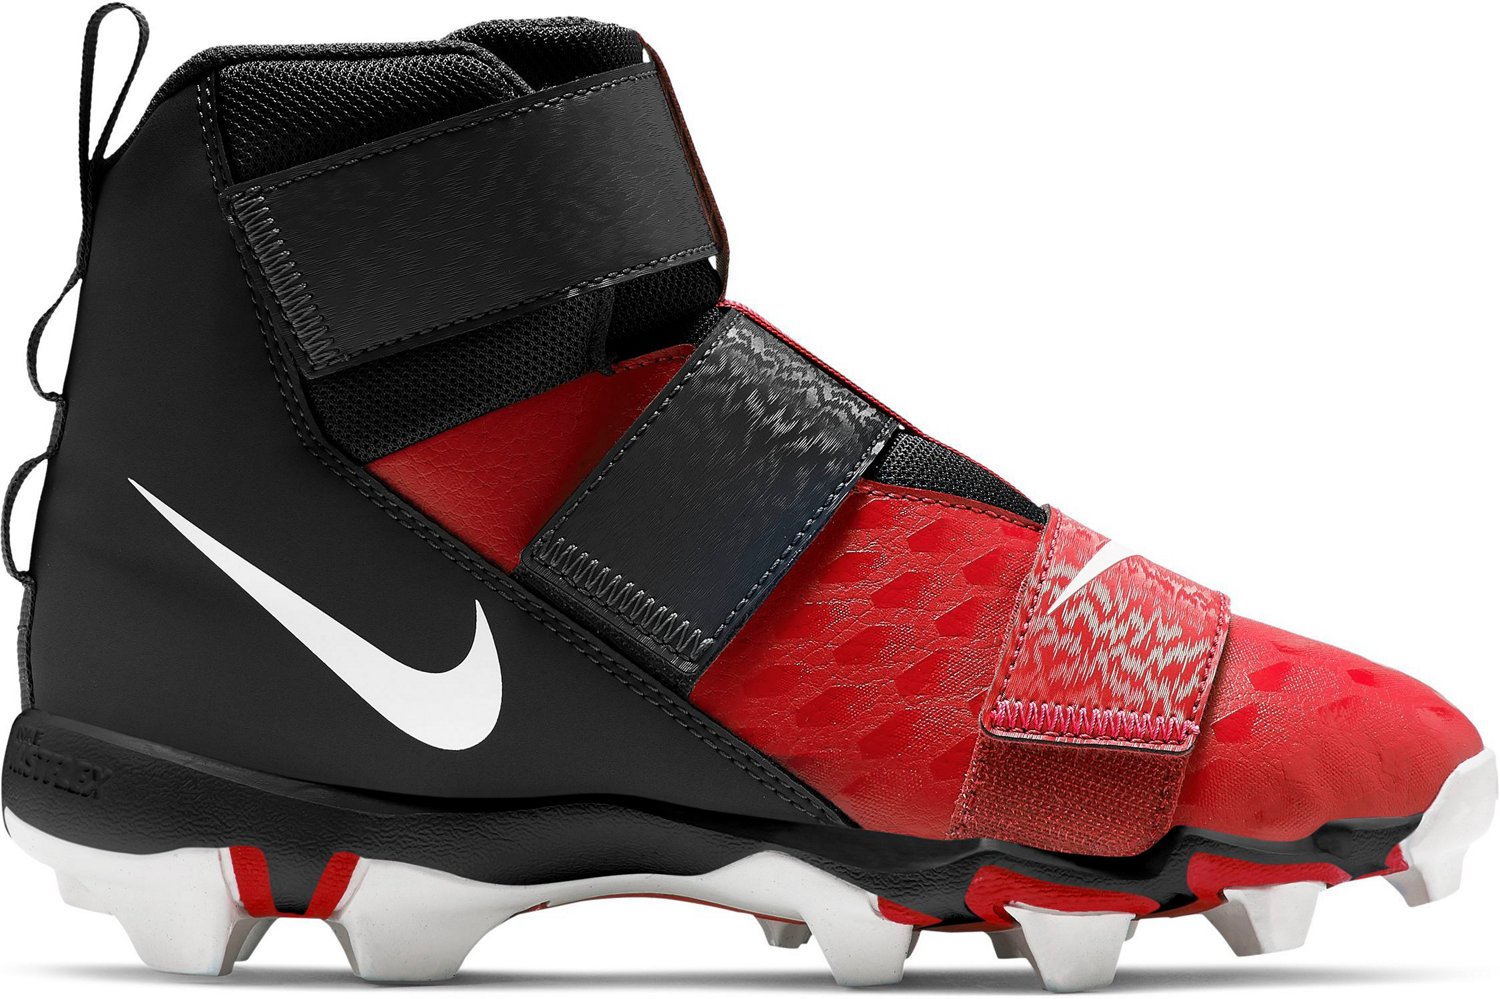 white youth football cleats